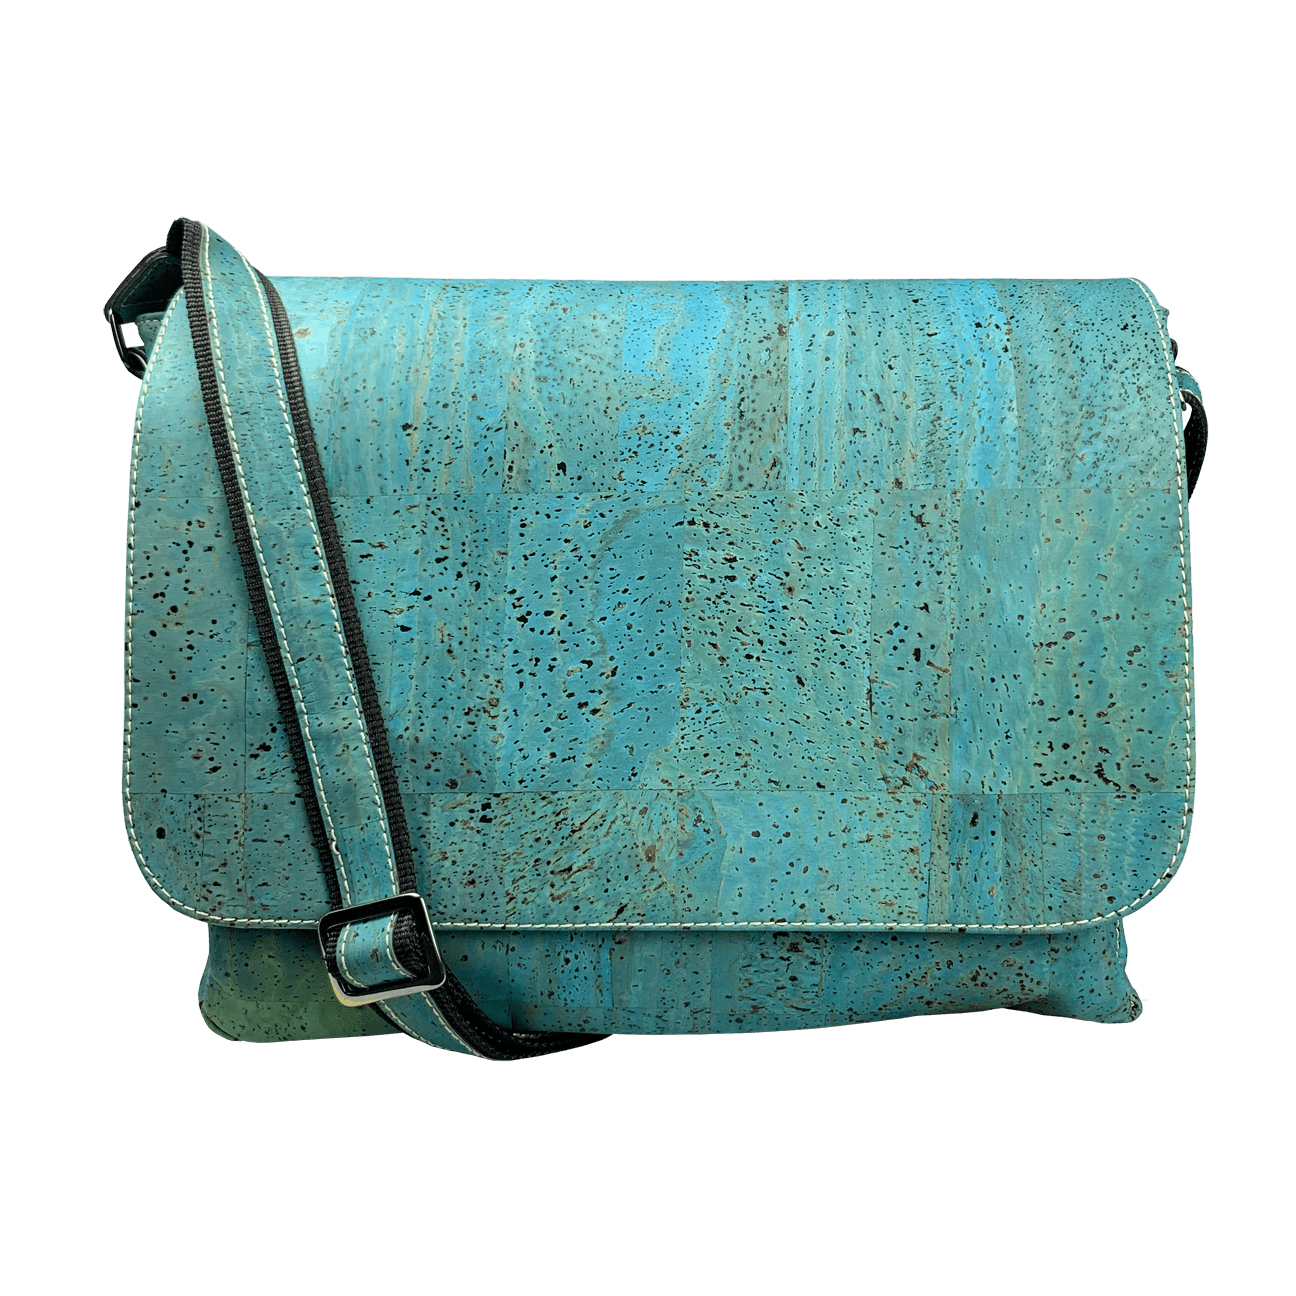 Bright aqua cork laptop bag with fold-over flap and white topstitching.